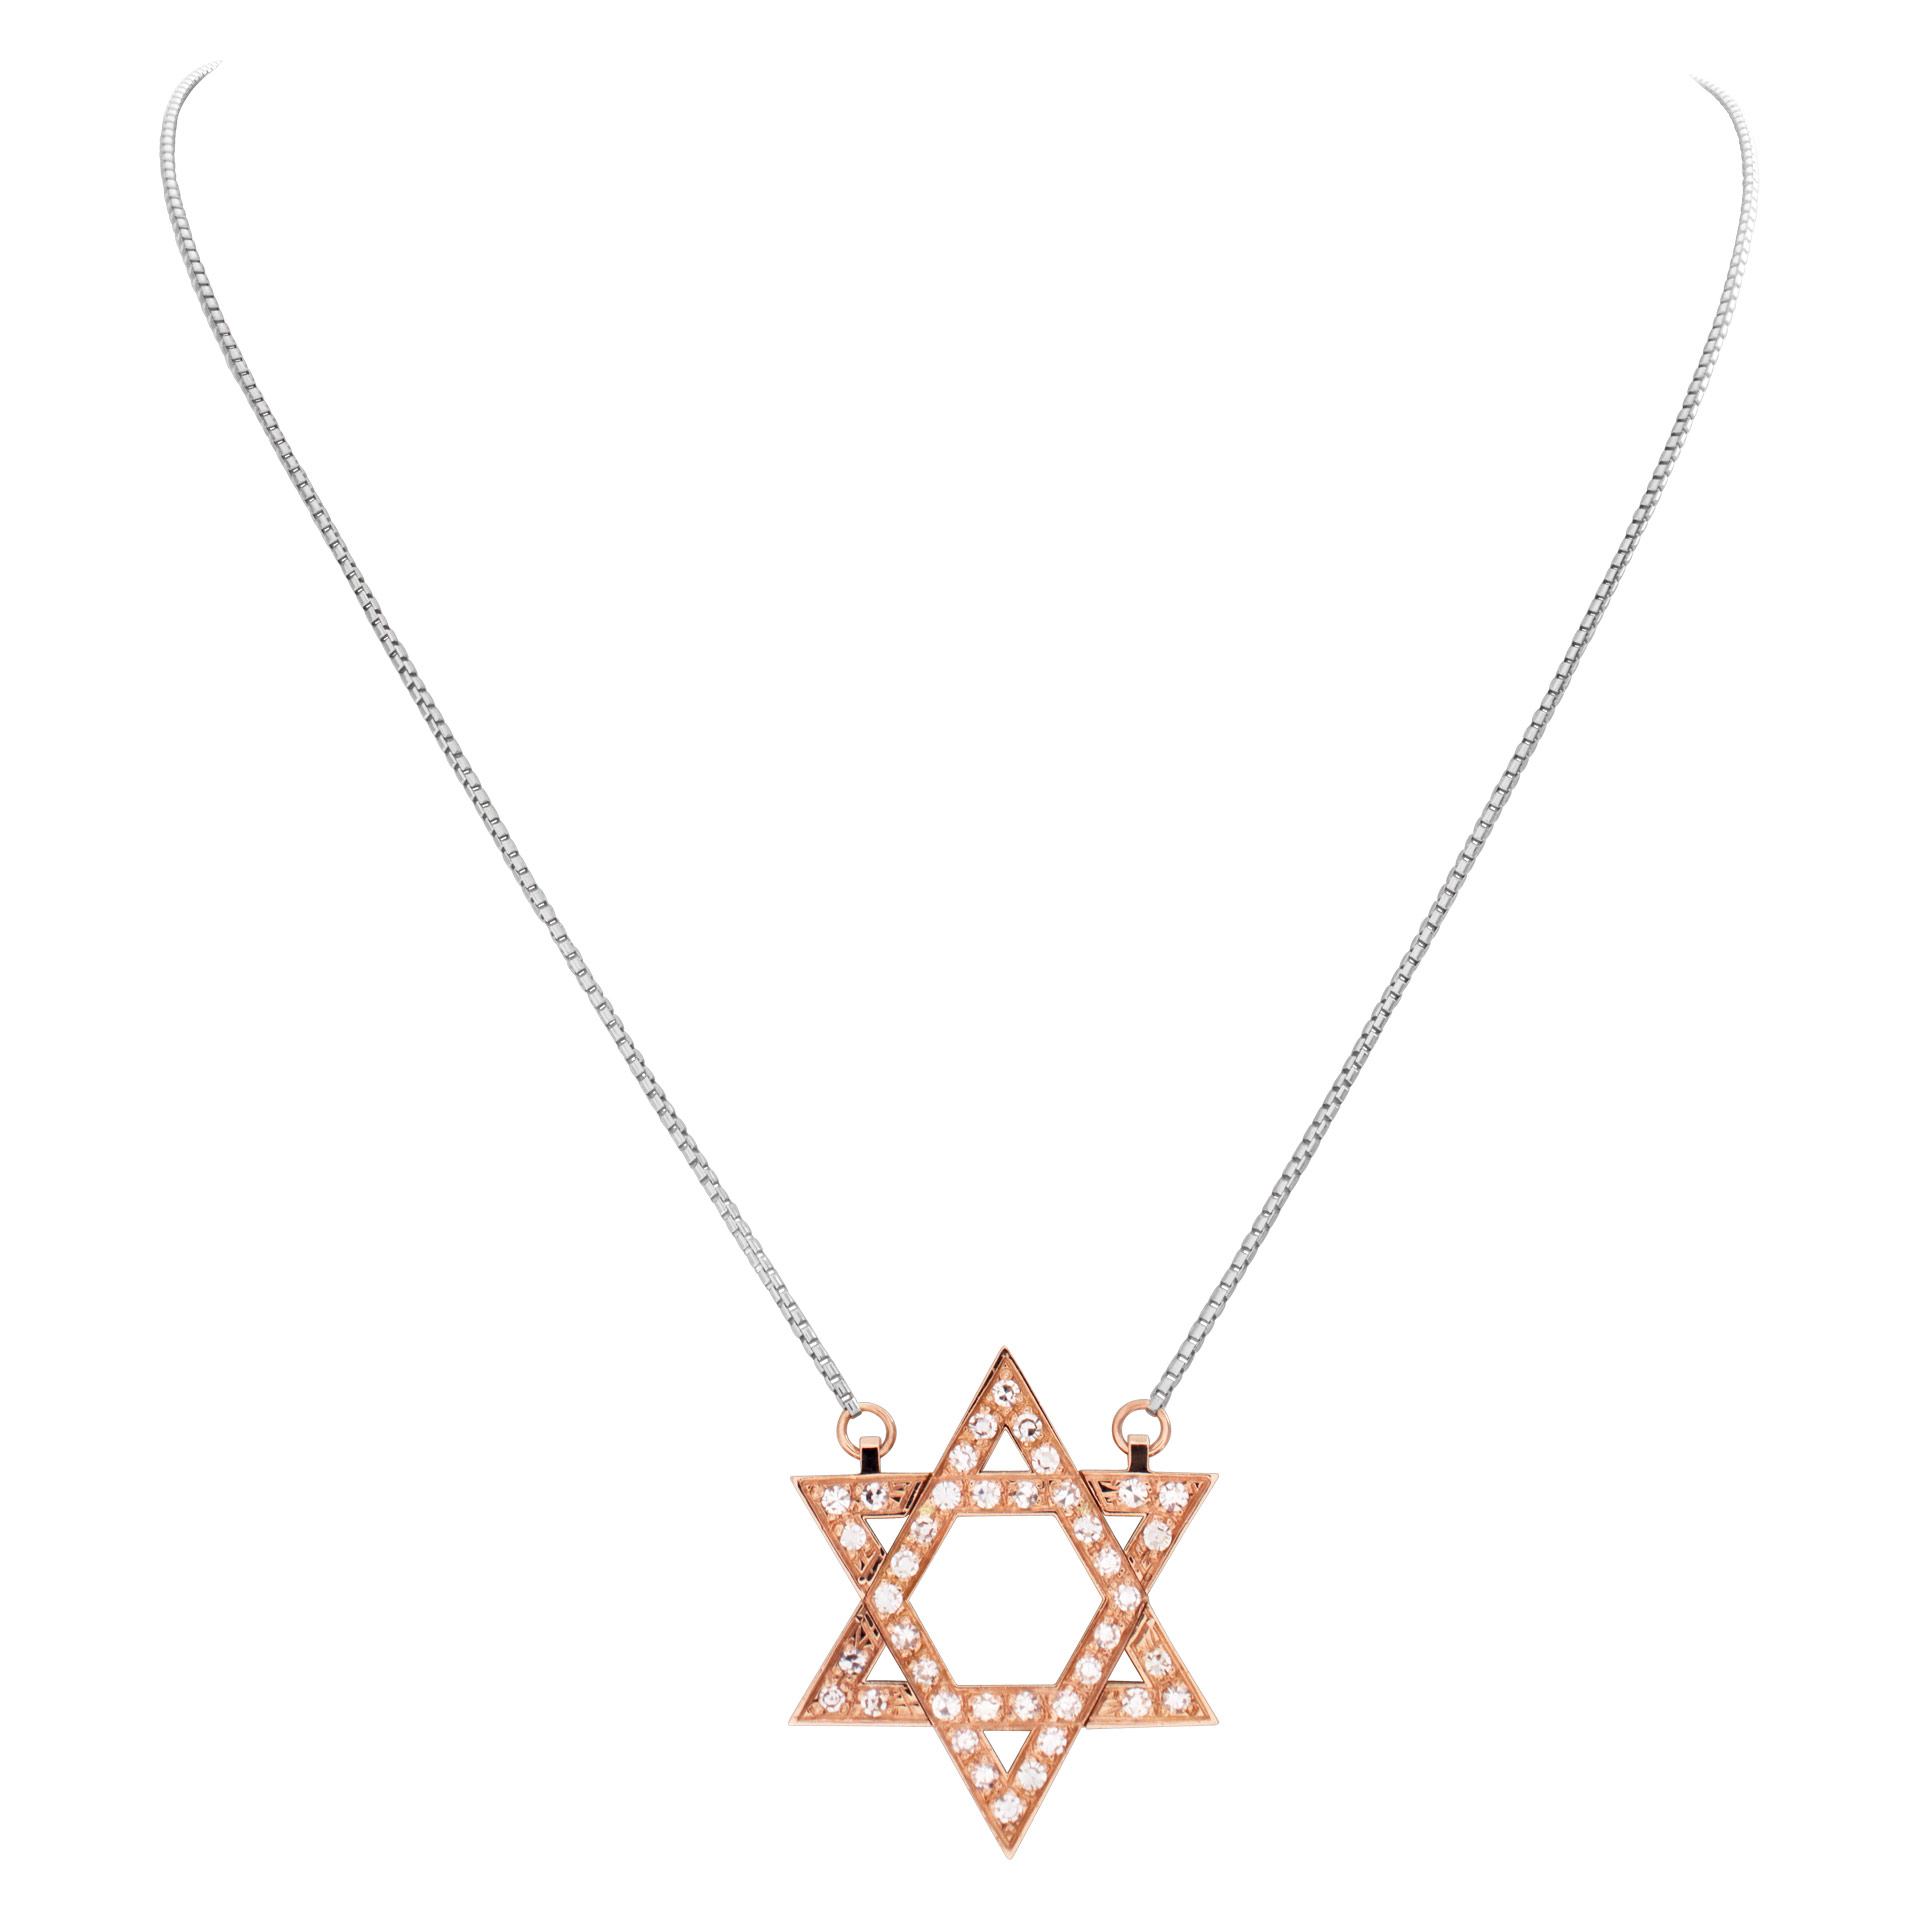 "Star of David" pendant with approximately 0.75 carat pave diamonds set in 18k rose gold with an 18k white gold chain (Stones)